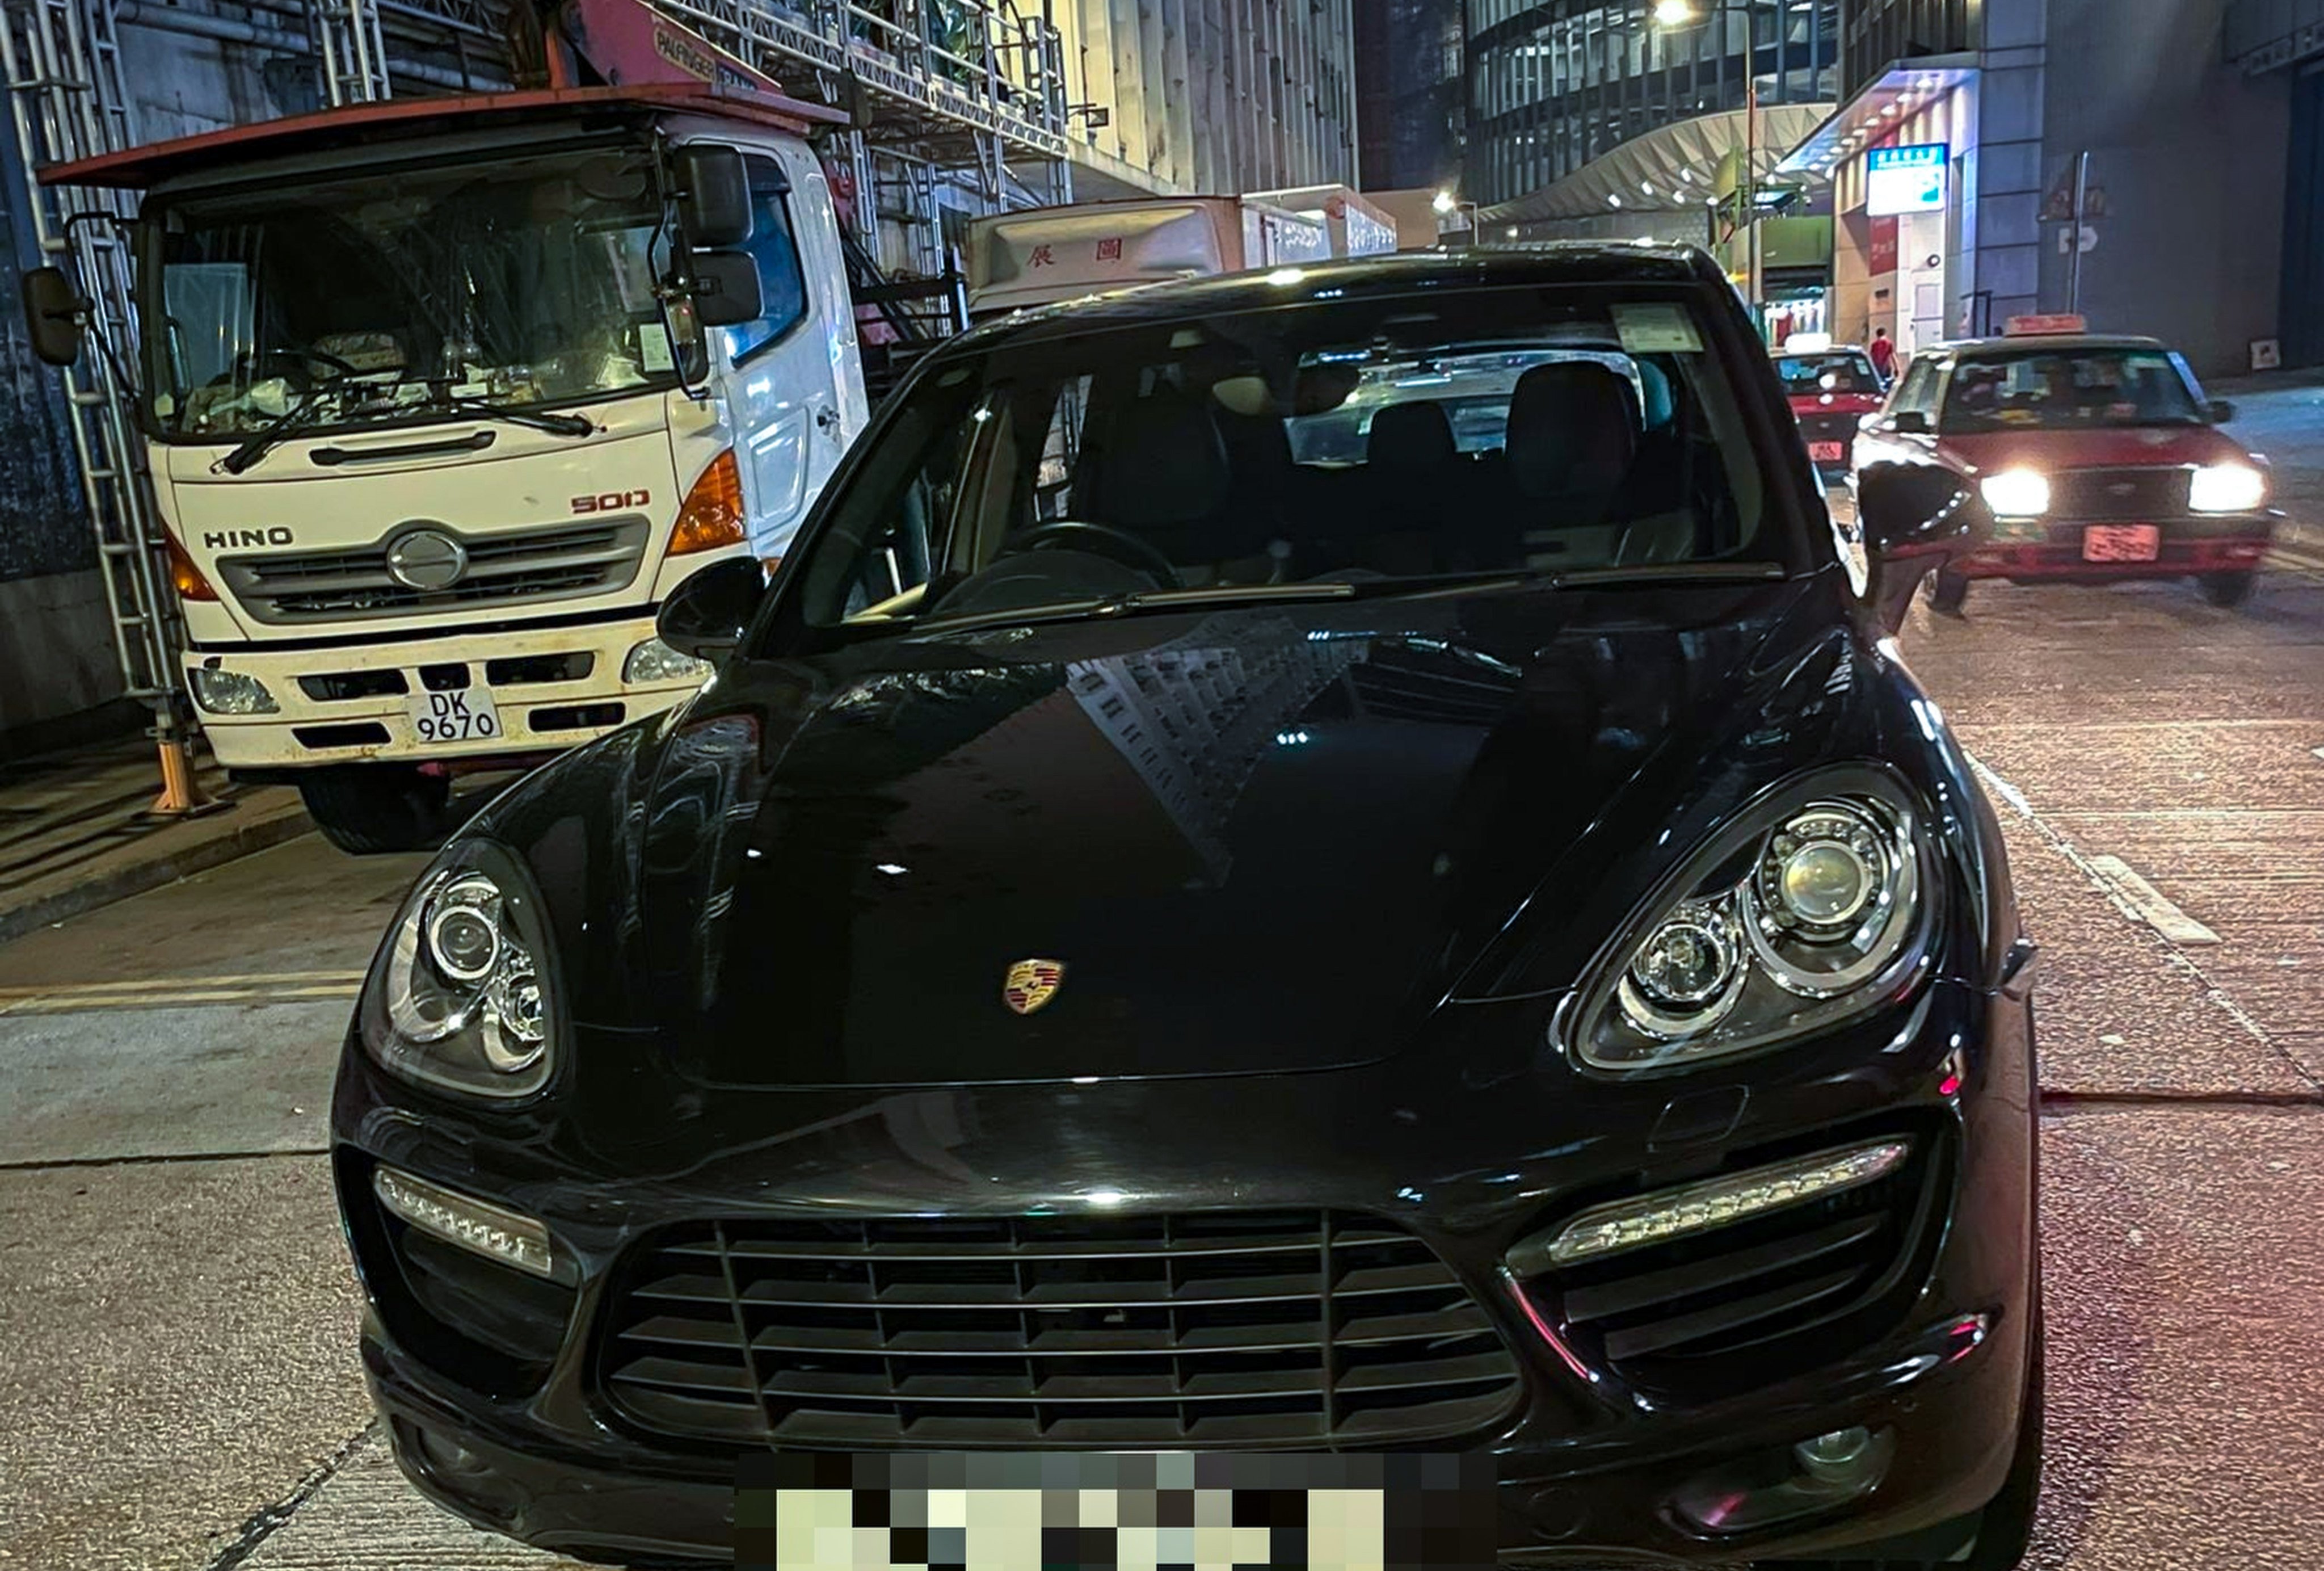 Arrests in an operation in Kowloon East involved drivers of luxury vehicles. Photo: Handout